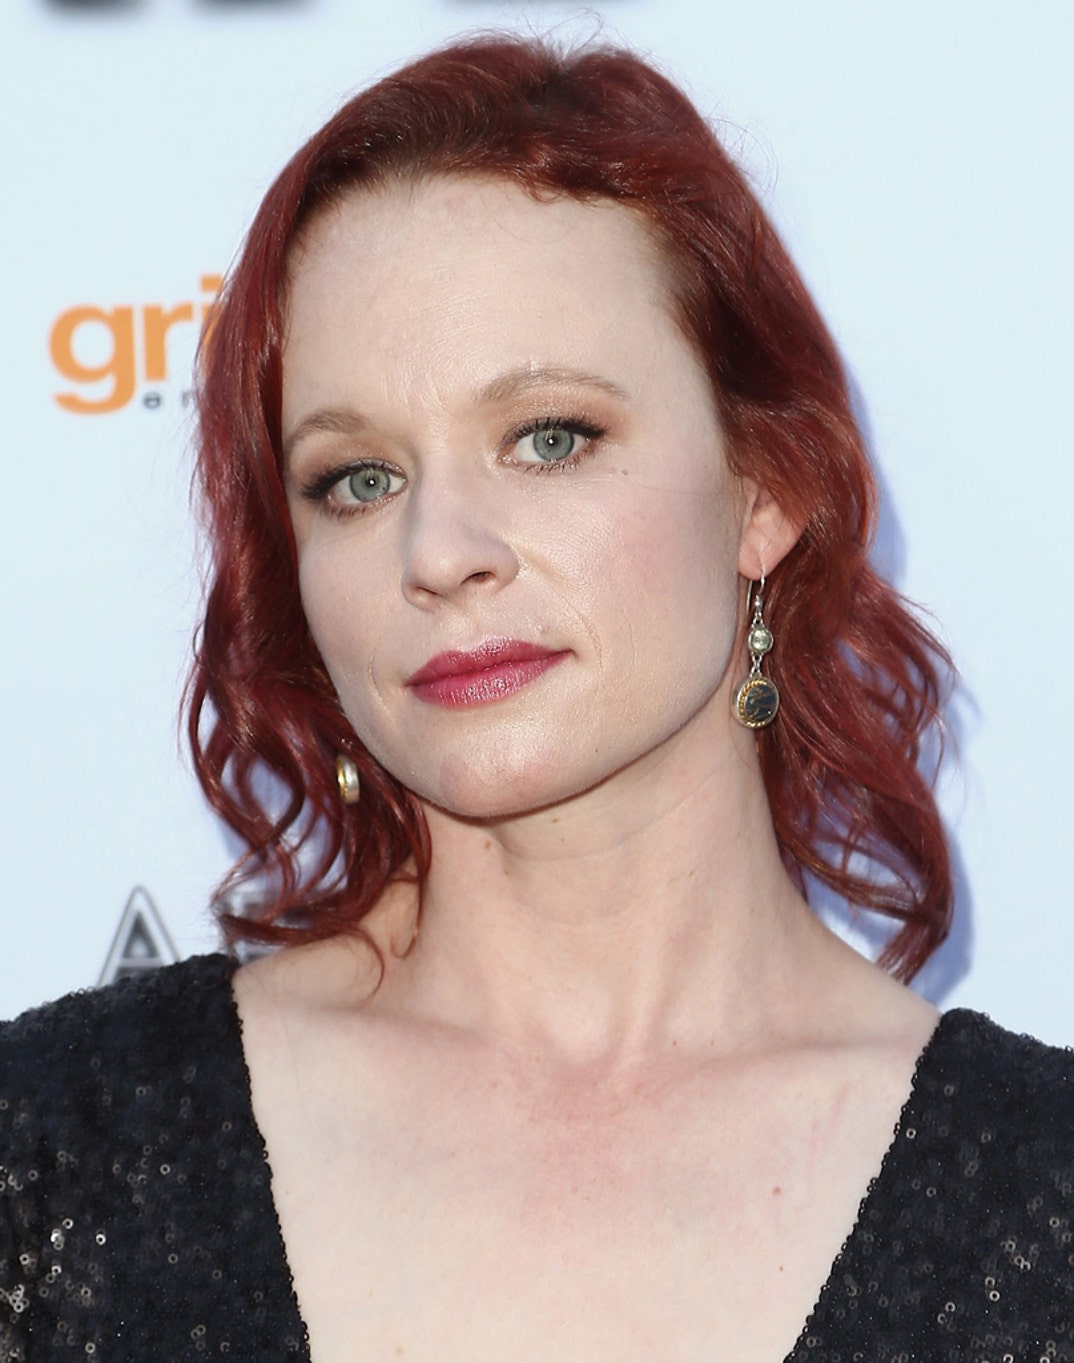 Thora Birch is now 36 years old